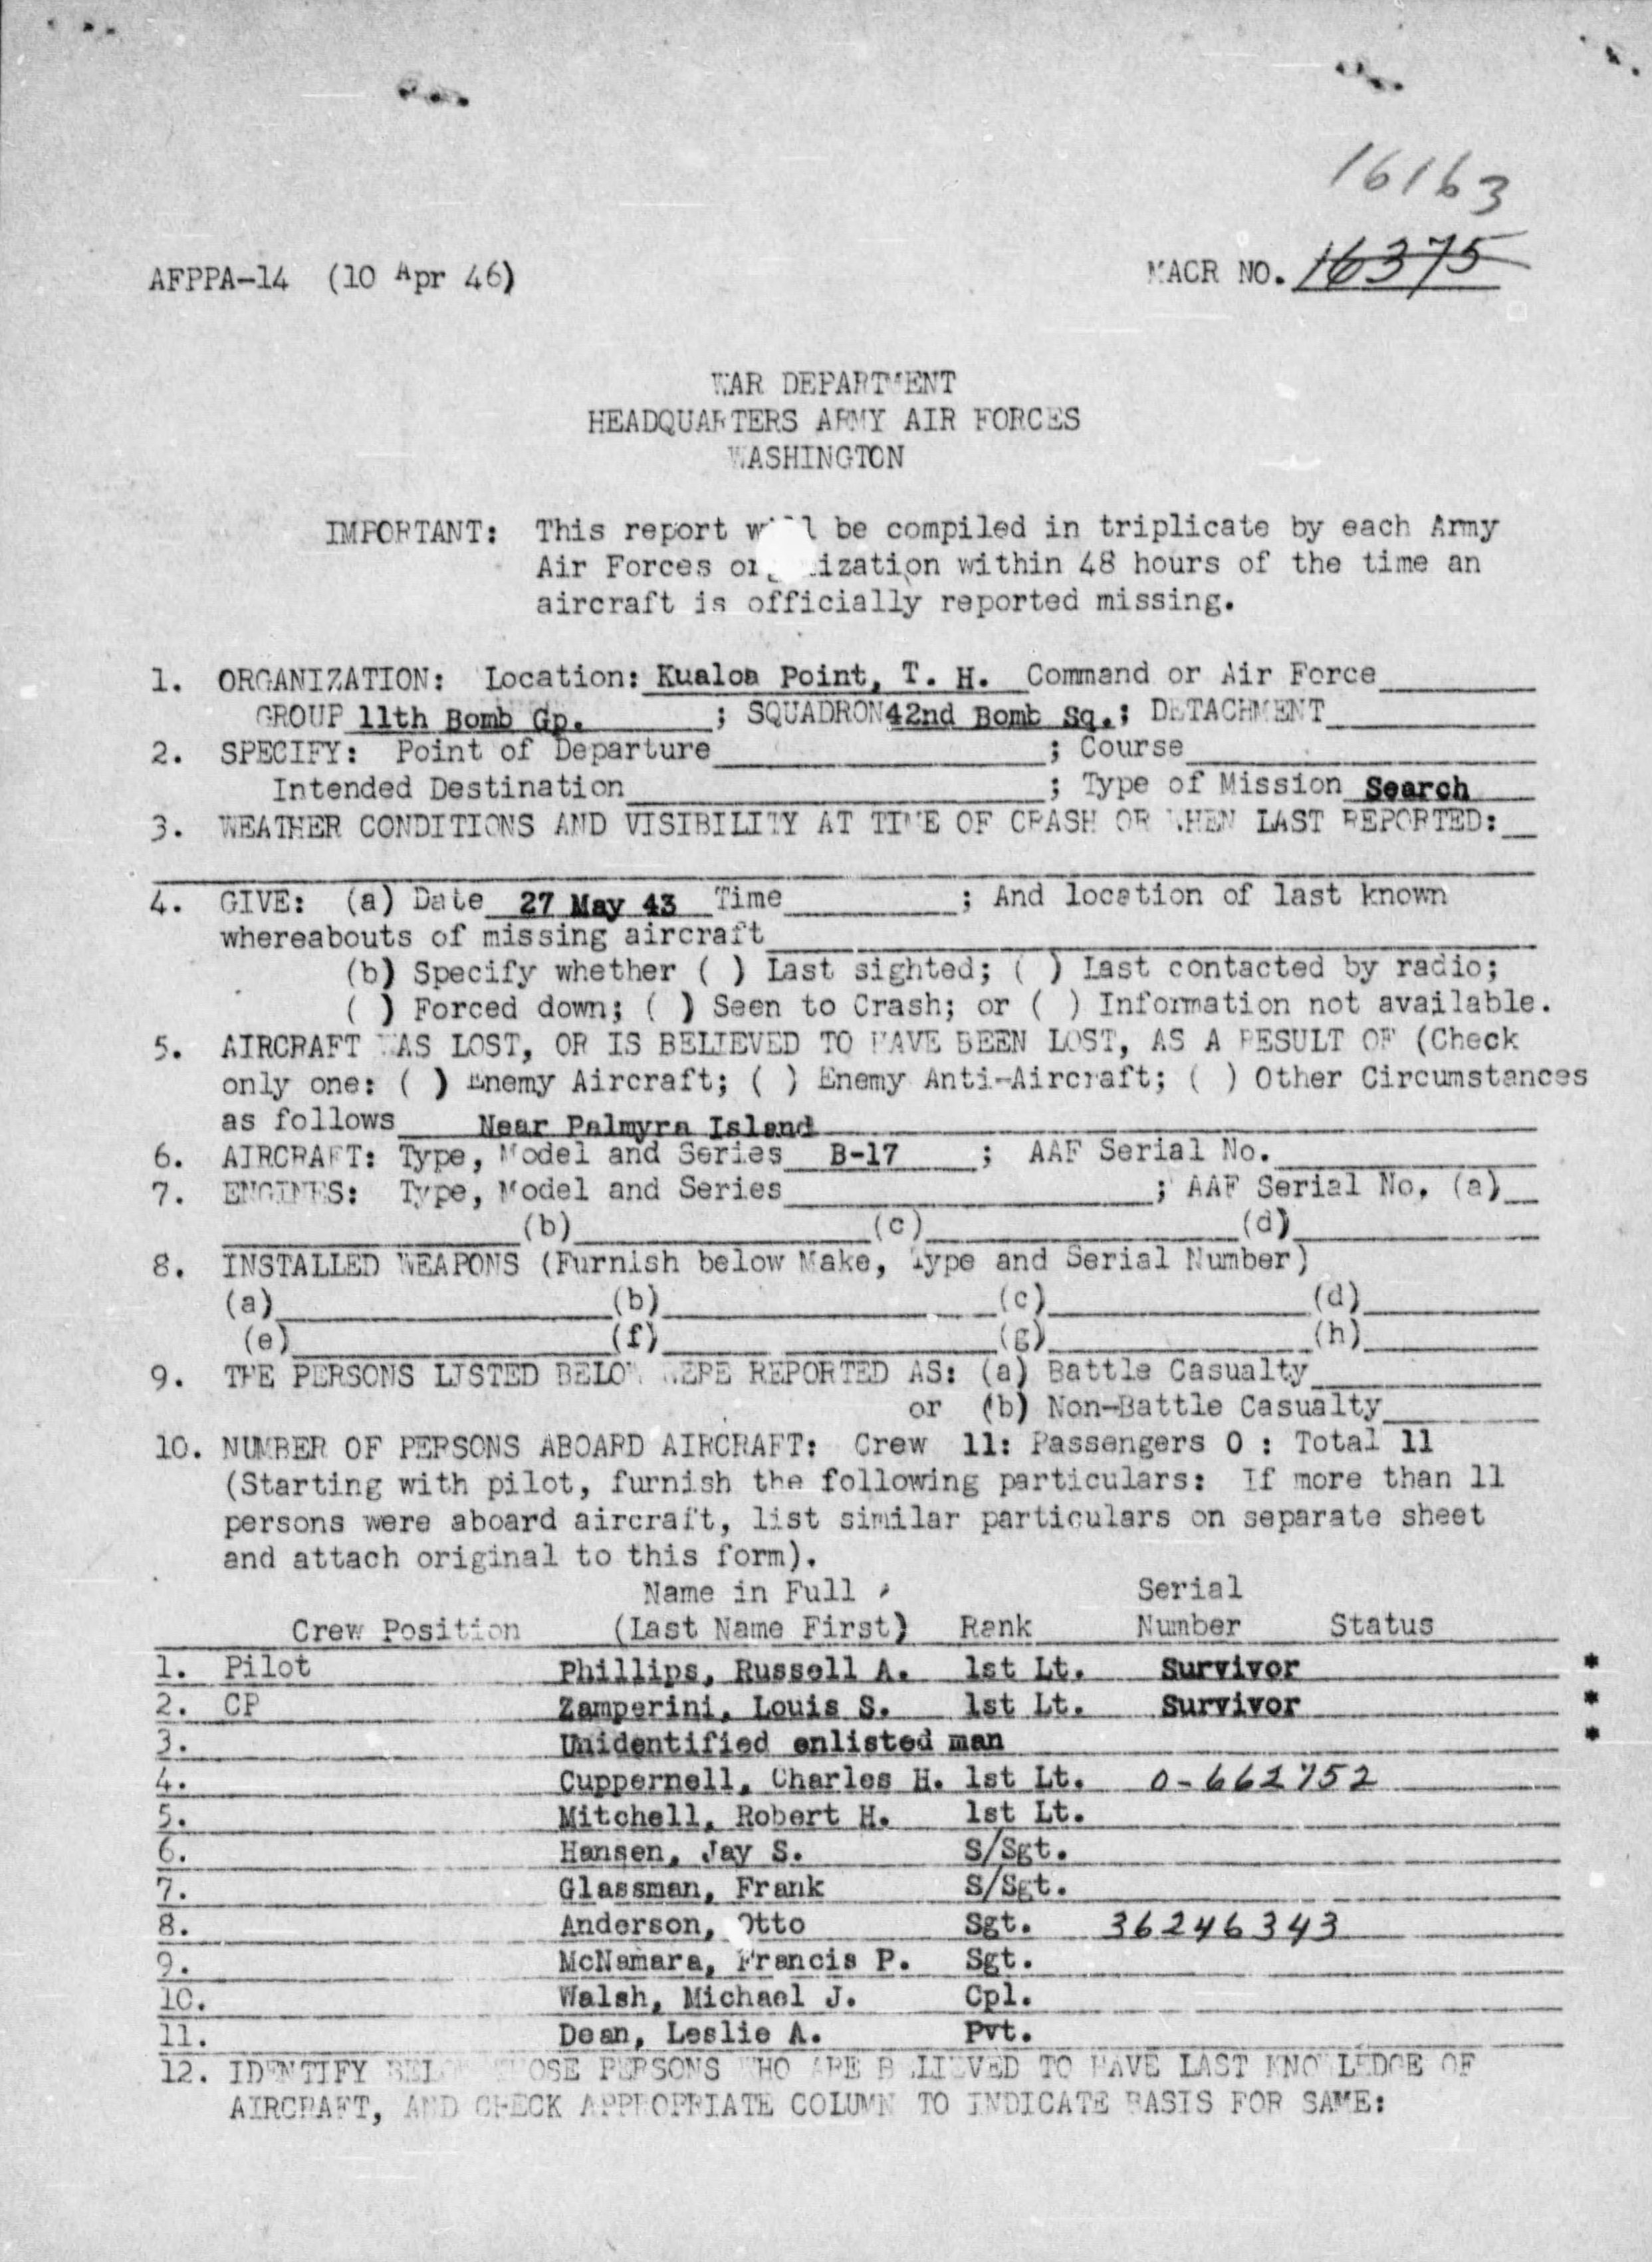 Missing Air Crew Report 16163, page 1 of 2. Report documents the loss of the Russell Phillips crew on May 27, 1943 near Palmyra Atoll. The crew included Louis Zamperini. See comment below.